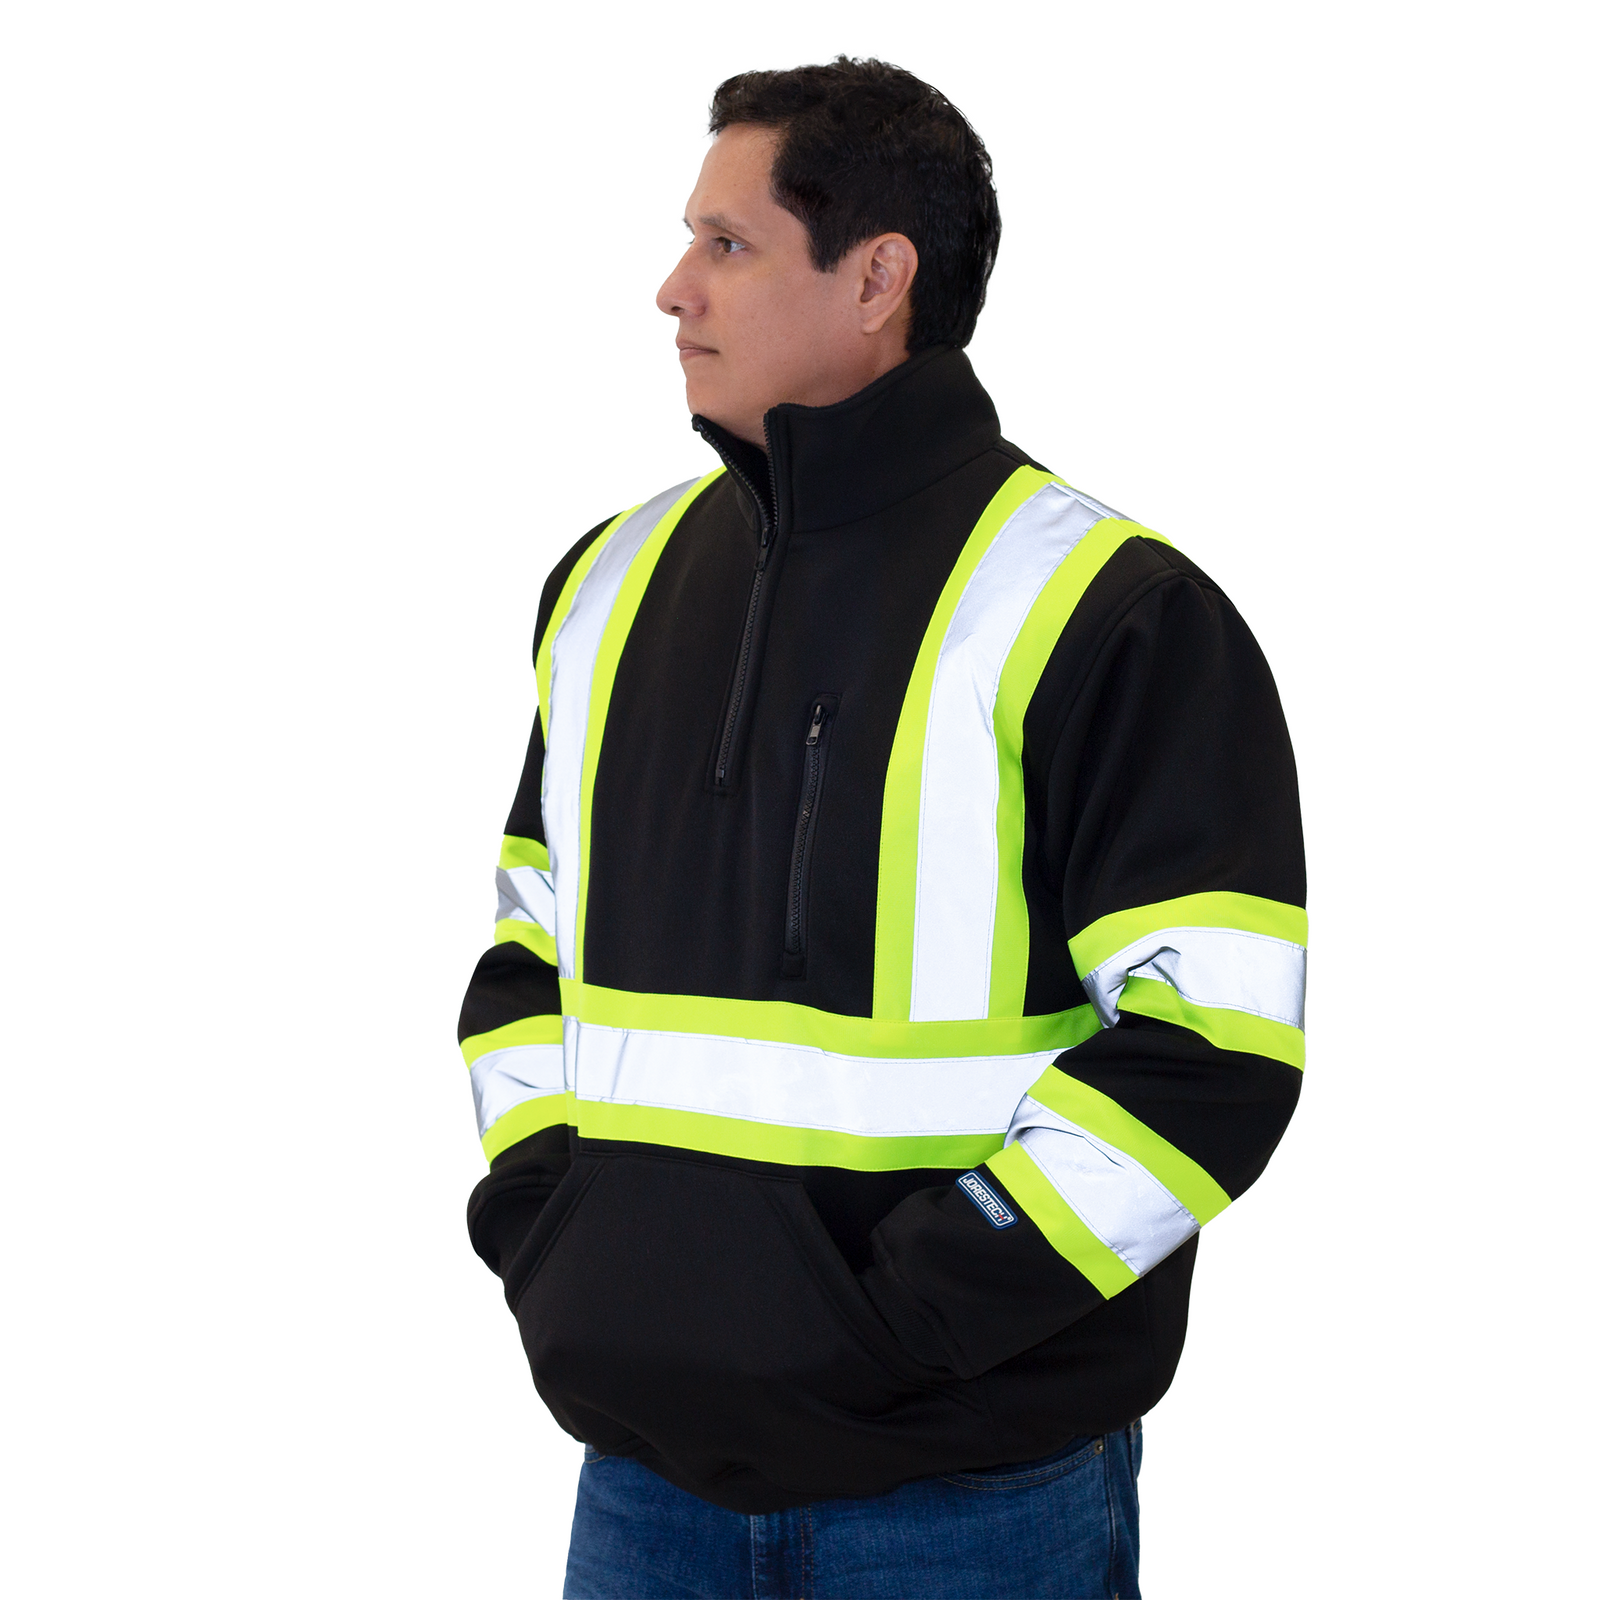 man wearing the black JORESTECH safety sweatshirt with contrasting yellow stripes ANSI class 1 type O